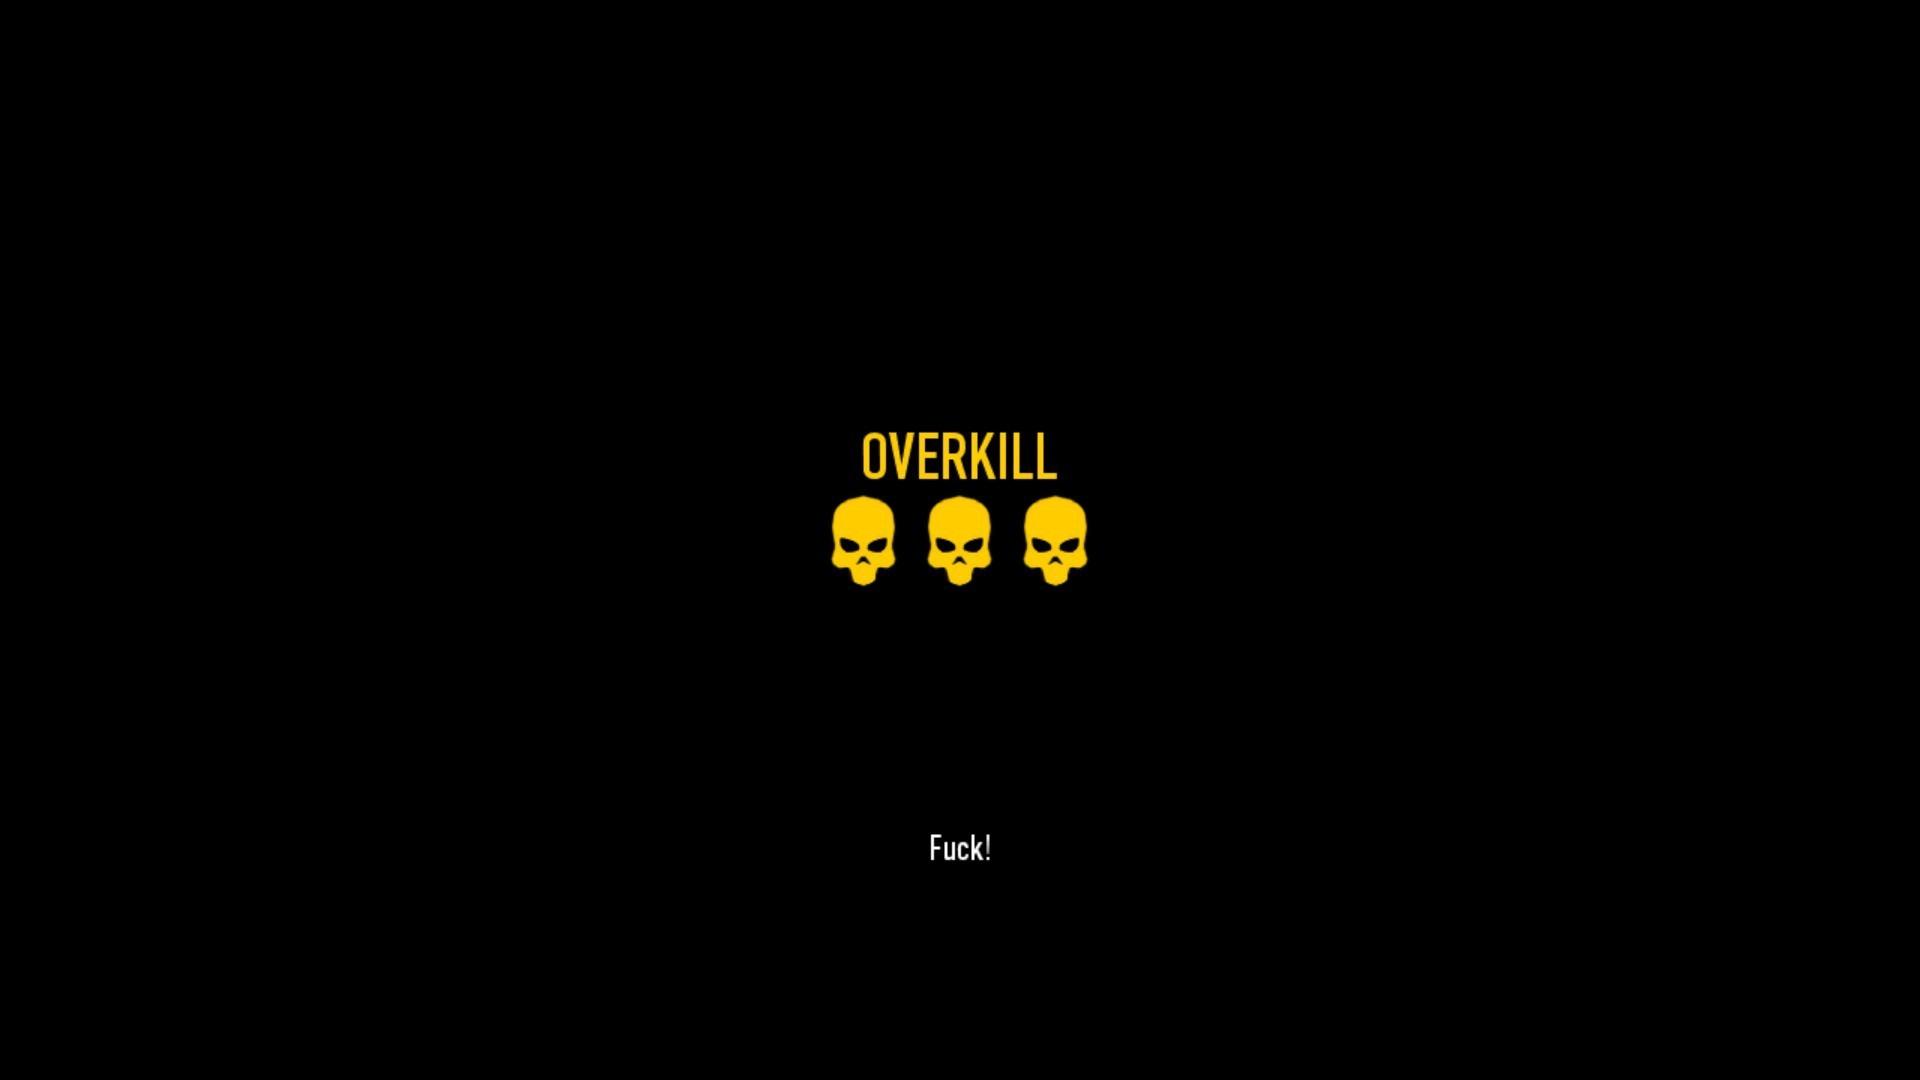 Overkill Payday The Heist Swear Words Wallpaper